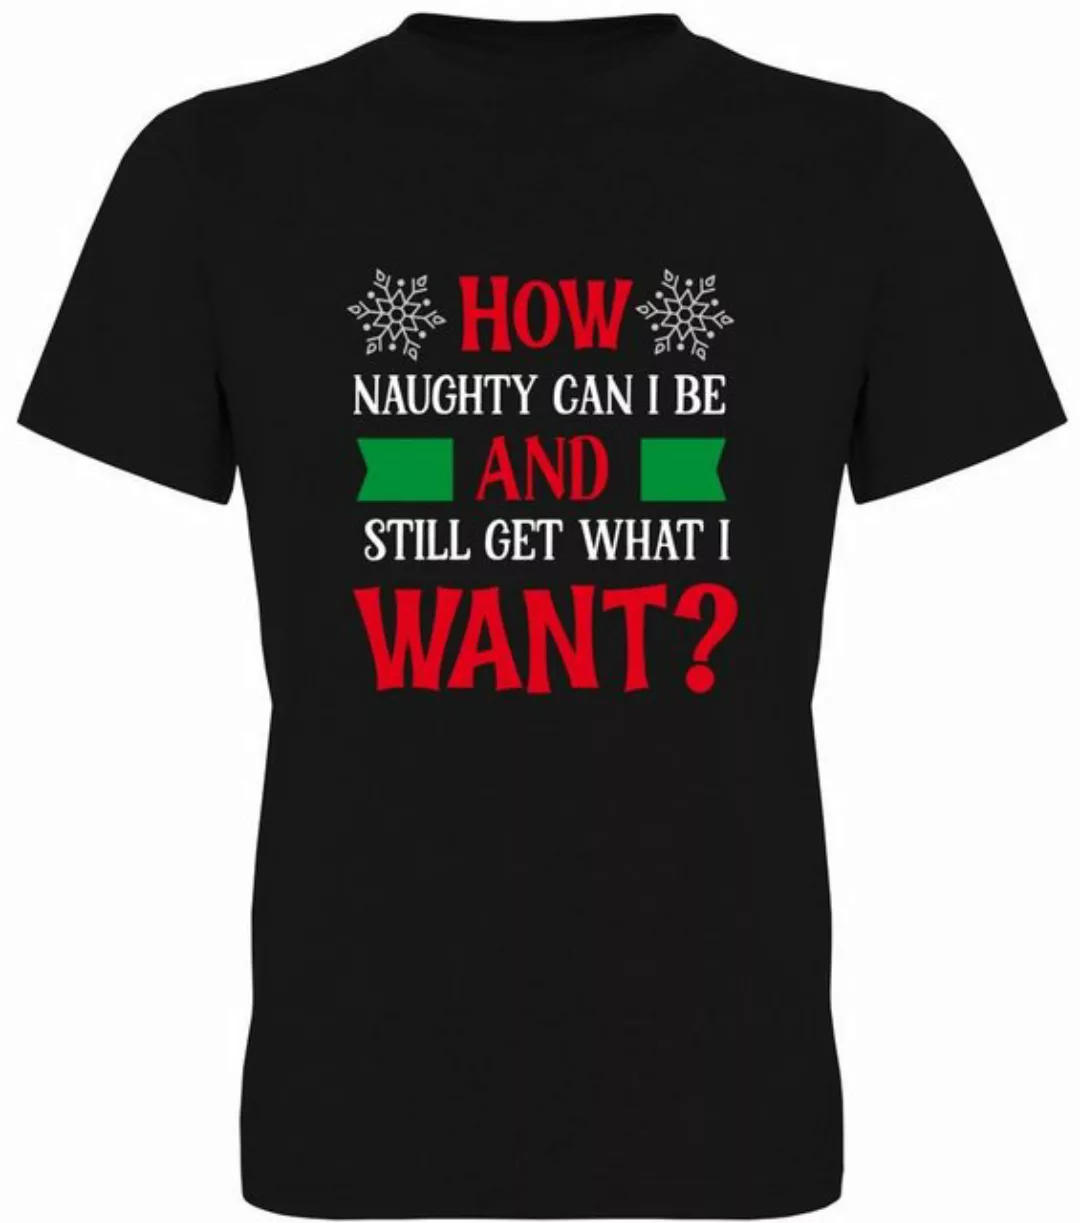 G-graphics T-Shirt How naughty can I be and still get what I want? Herren T günstig online kaufen